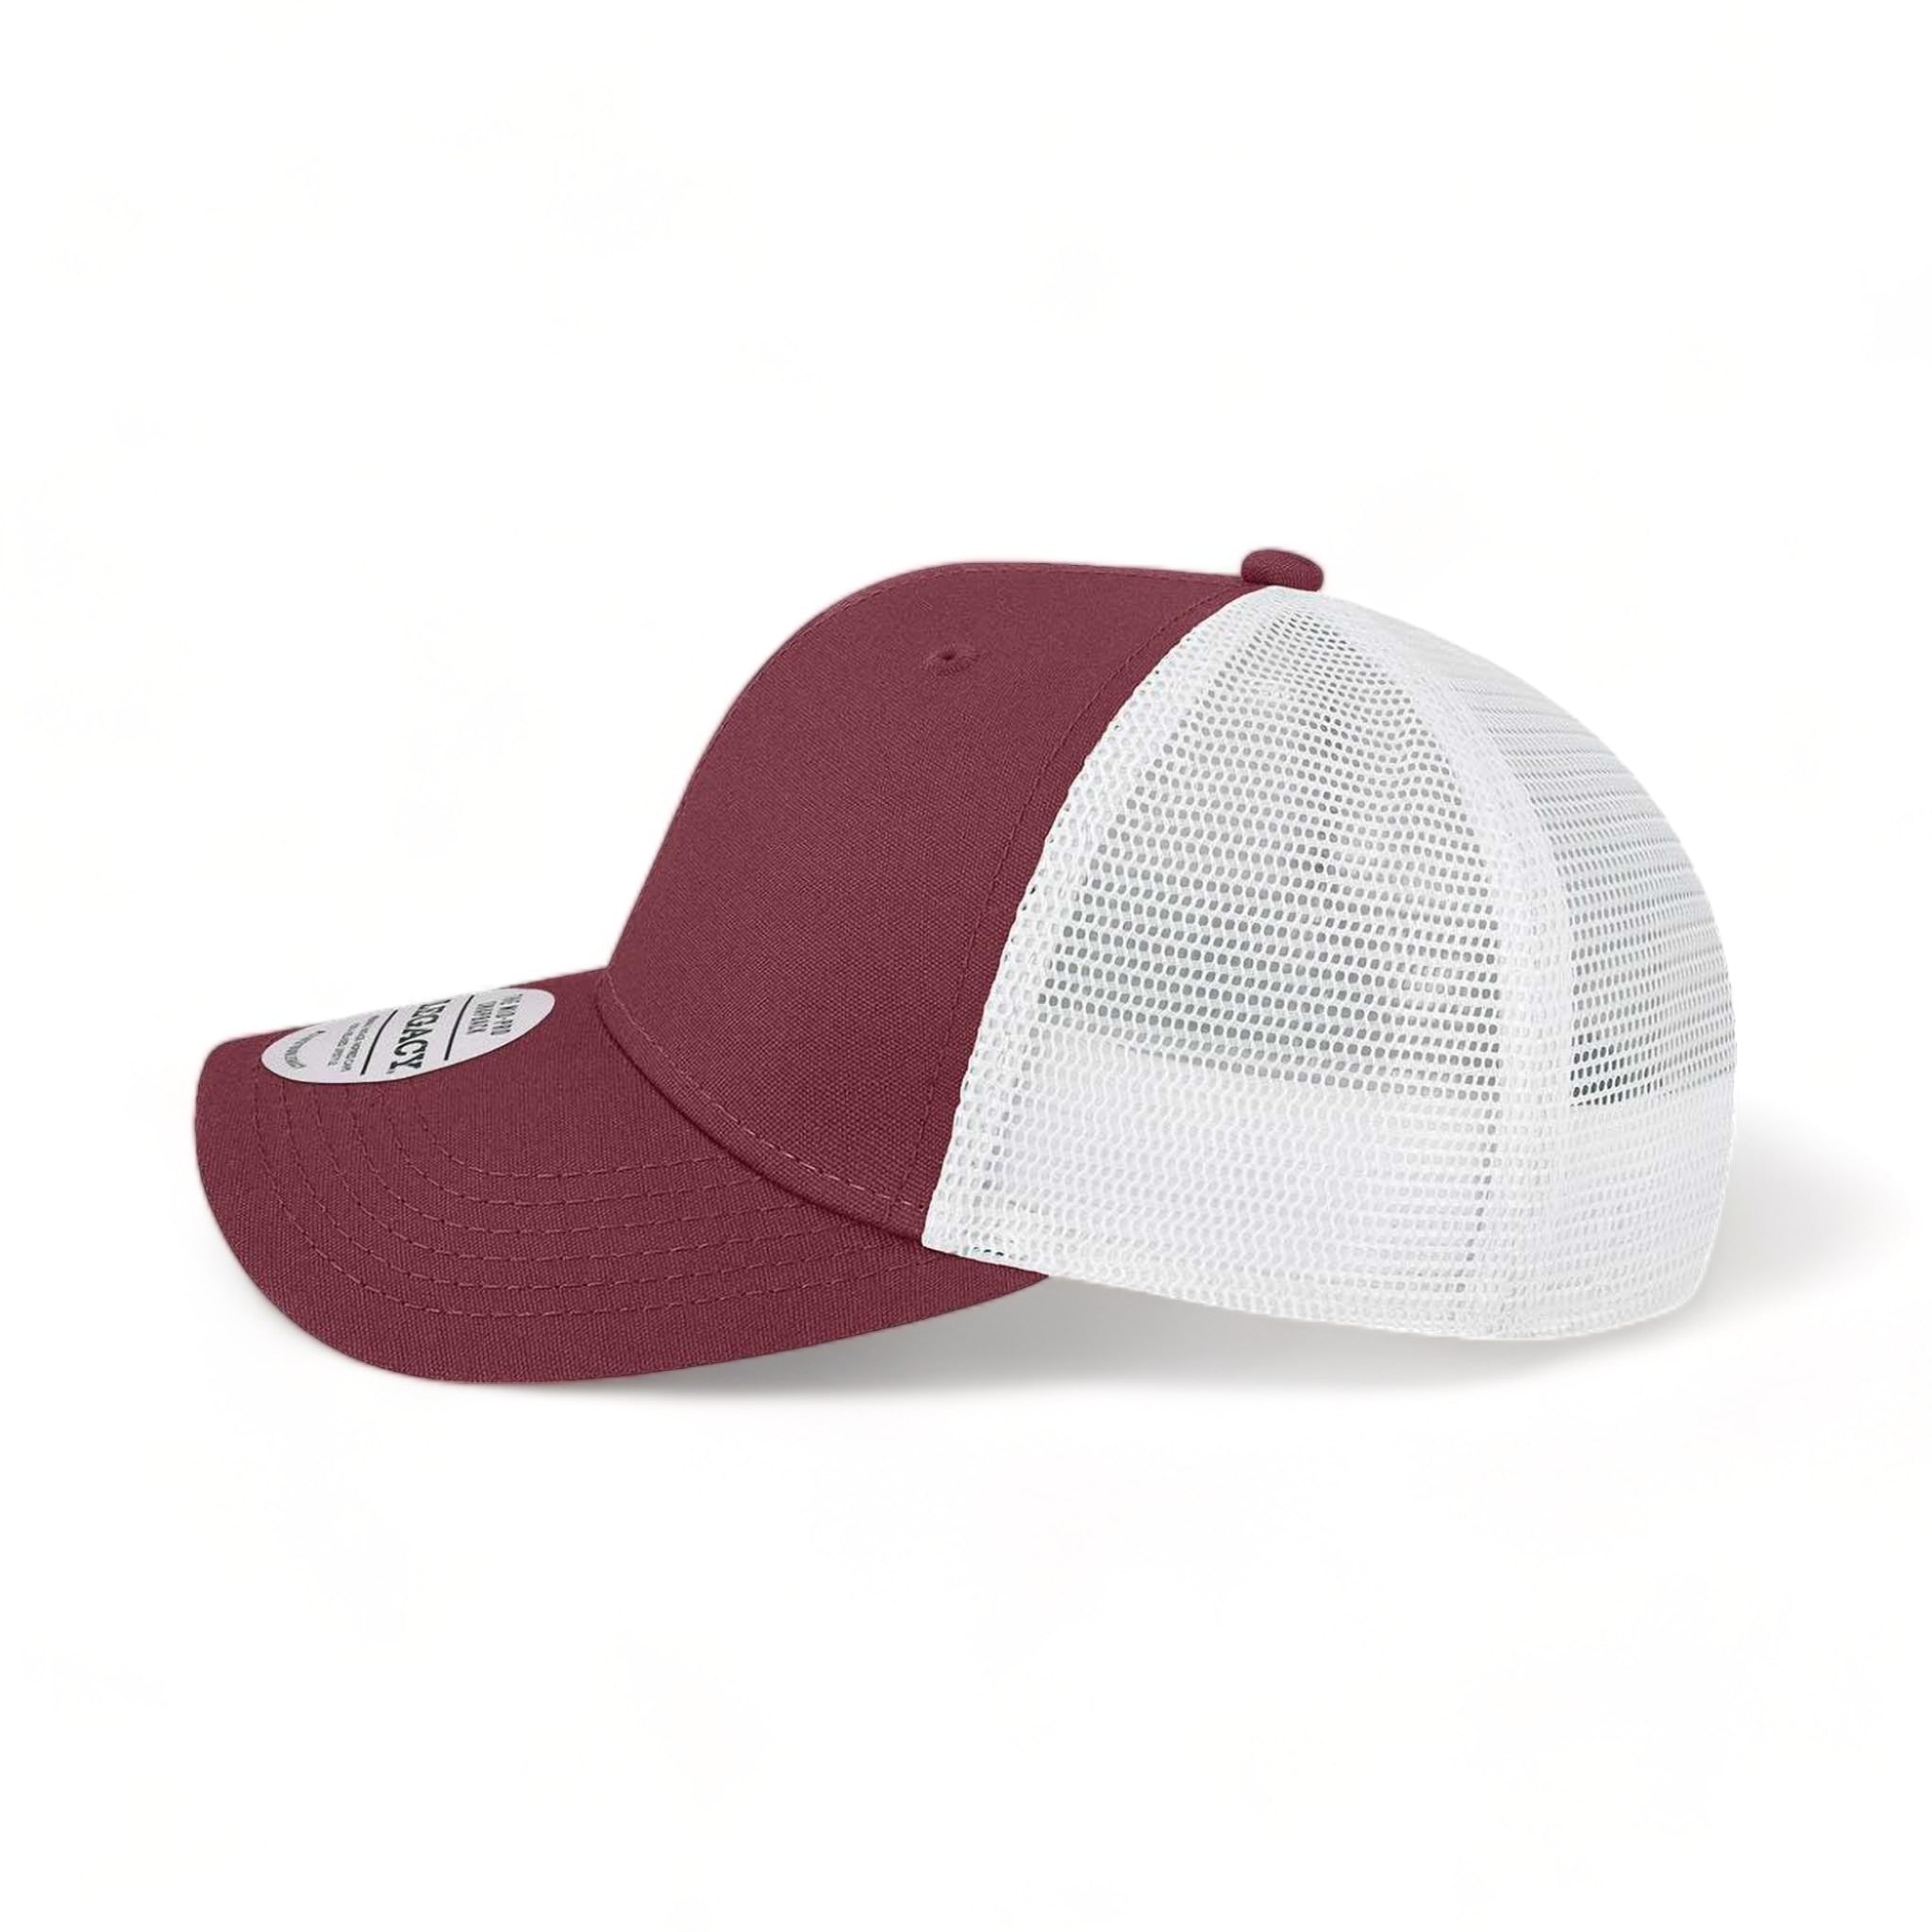 Side view of LEGACY MPS custom hat in maroon and white